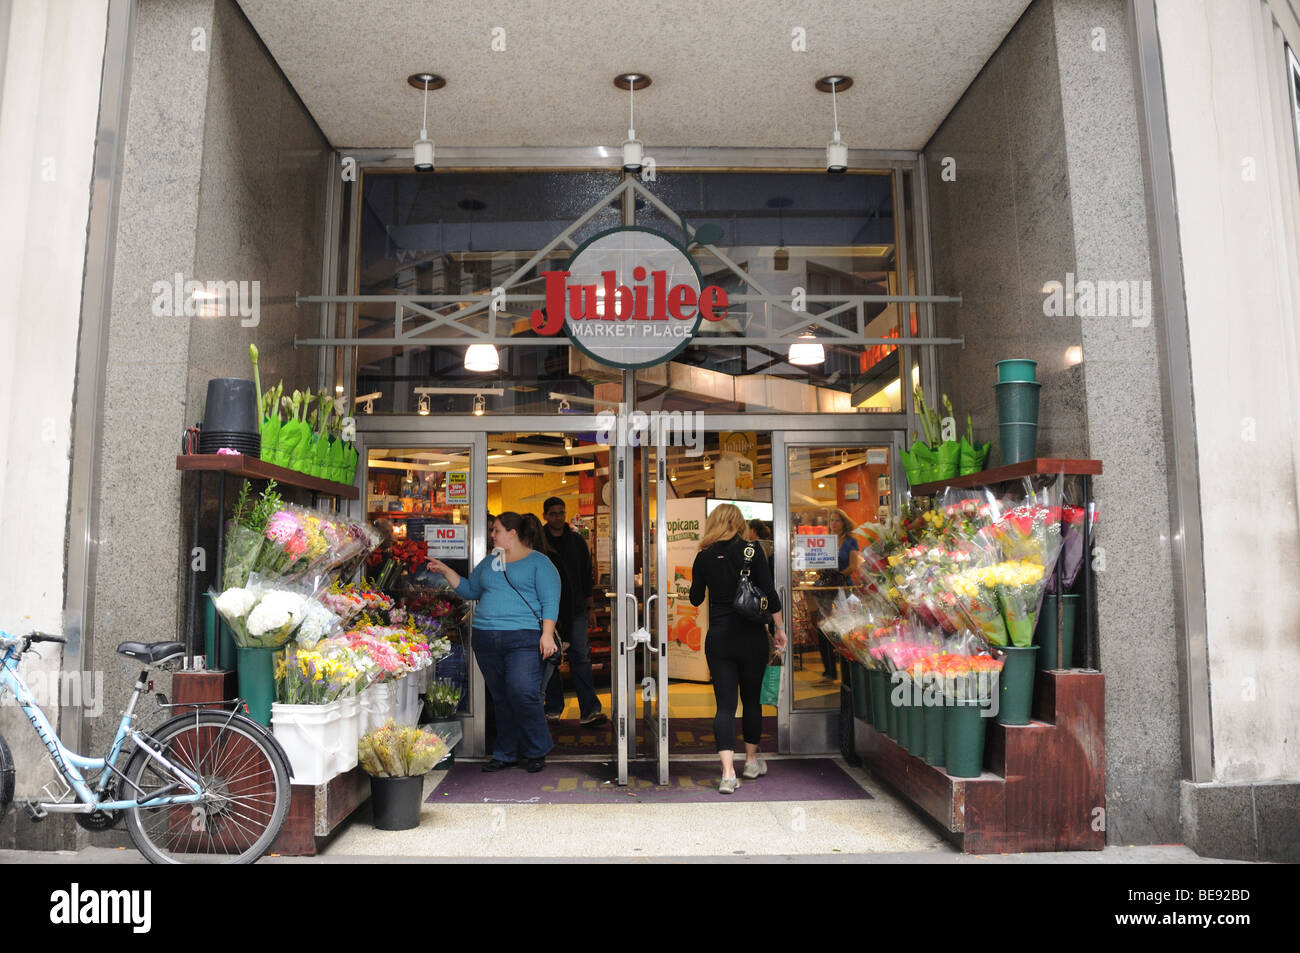 A small food market in Lower Manhattan. Sept. 26, 2009 Stock Photo